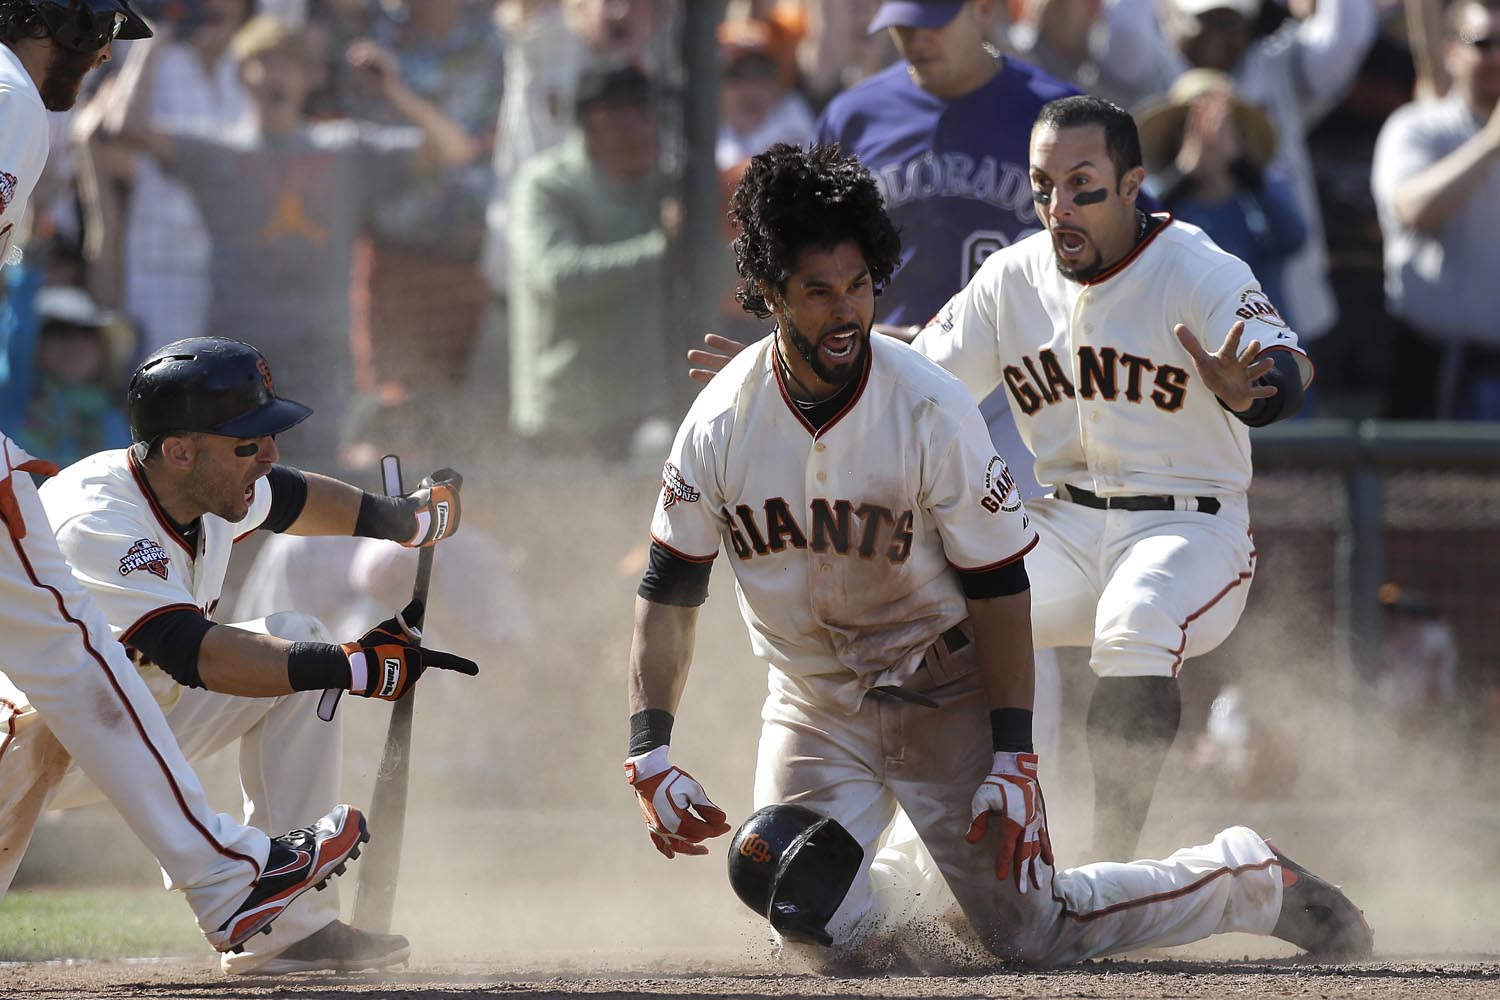 May 25, 2013. San Francisco Giants' Angel Pagan, center, celebrates with Marco Scutaro, left, and Andres Torres after hitting an inside the park two-run home run off of Colorado Rockies pitcher Rafael Betancourt during the 10th inning of a baseball game in San Francisco.